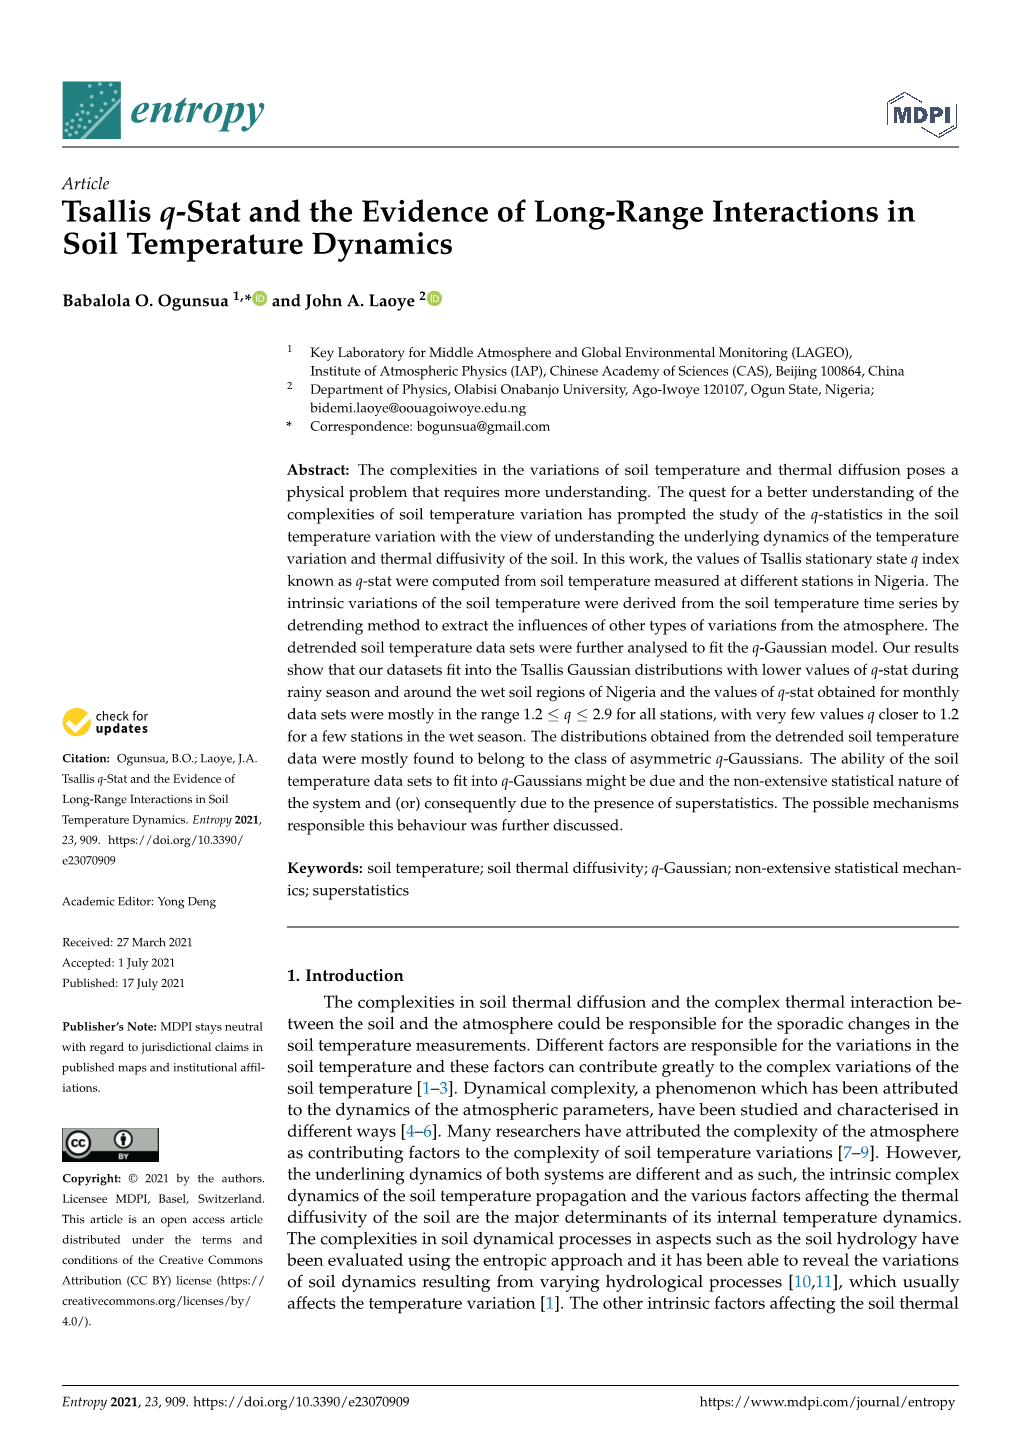 Tsallis Q-Stat and the Evidence of Long-Range Interactions in Soil Temperature Dynamics